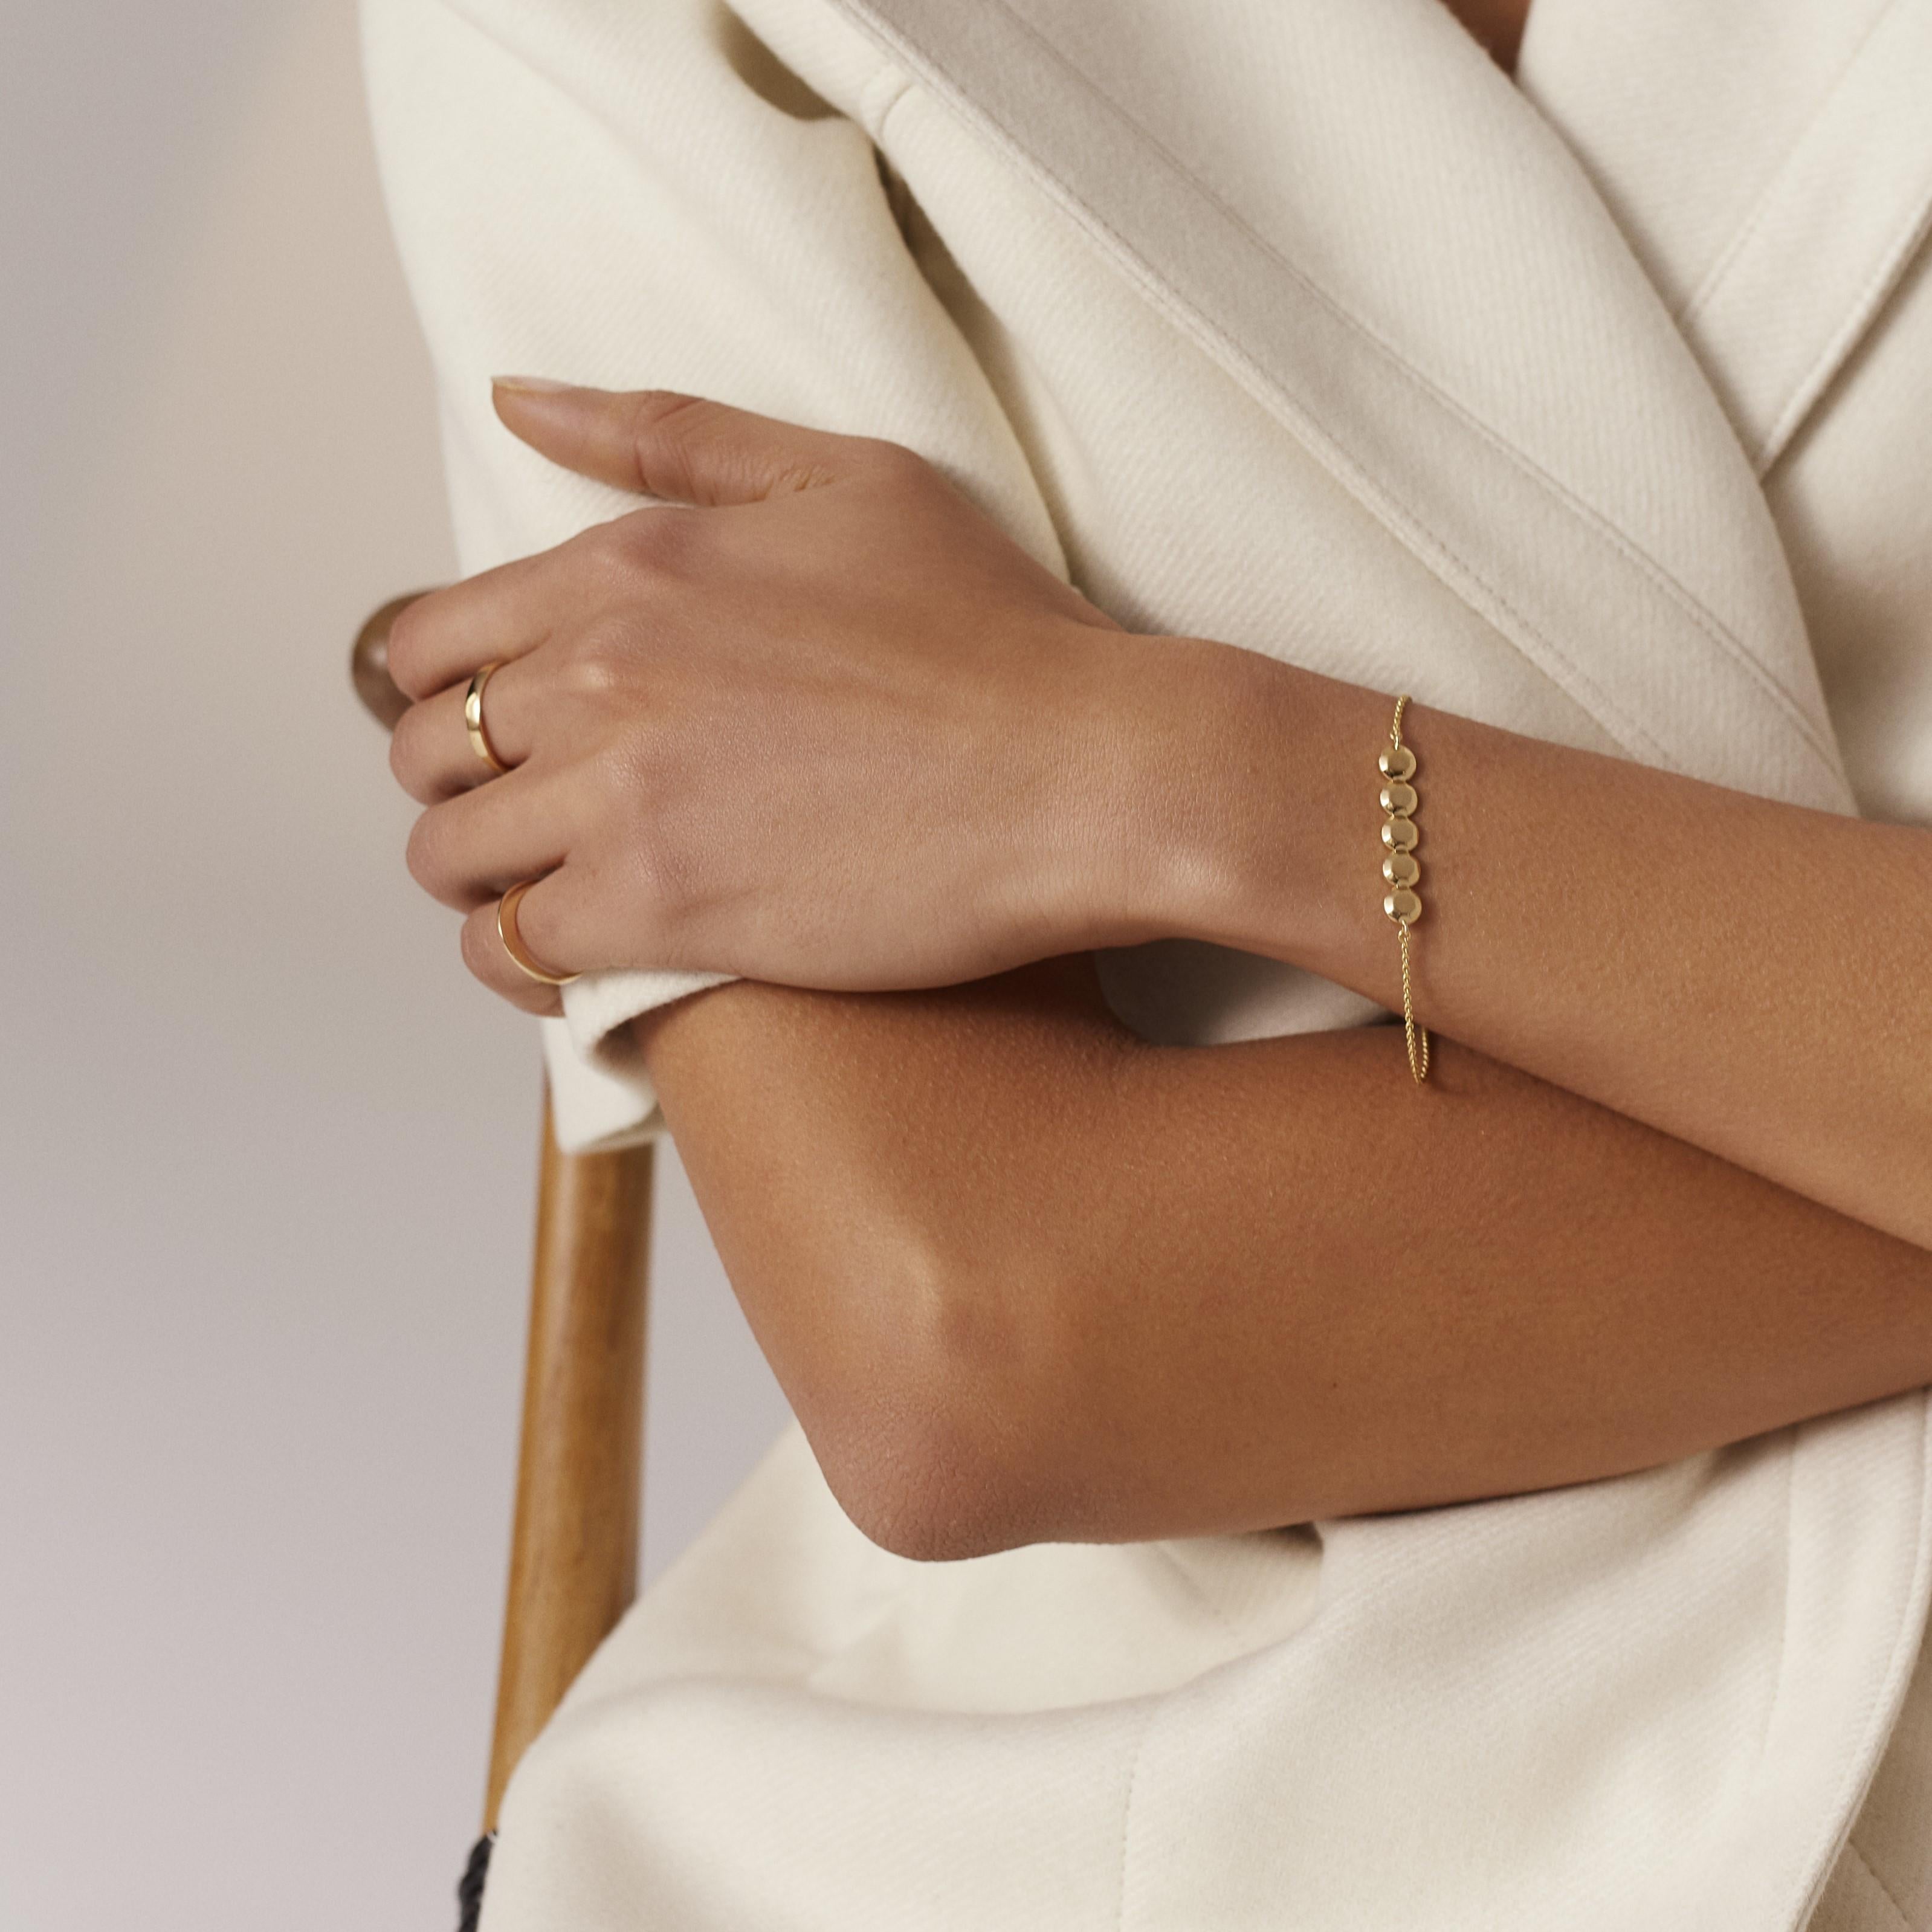 Available also in recycled sterling silver.

INTO YOU bracelet in solid, recycled 18k gold. Understated and refined, this gold bracelet with five gold ‘diamonds’ is the perfect match for a classic wardrobe designed to last. Just as all our